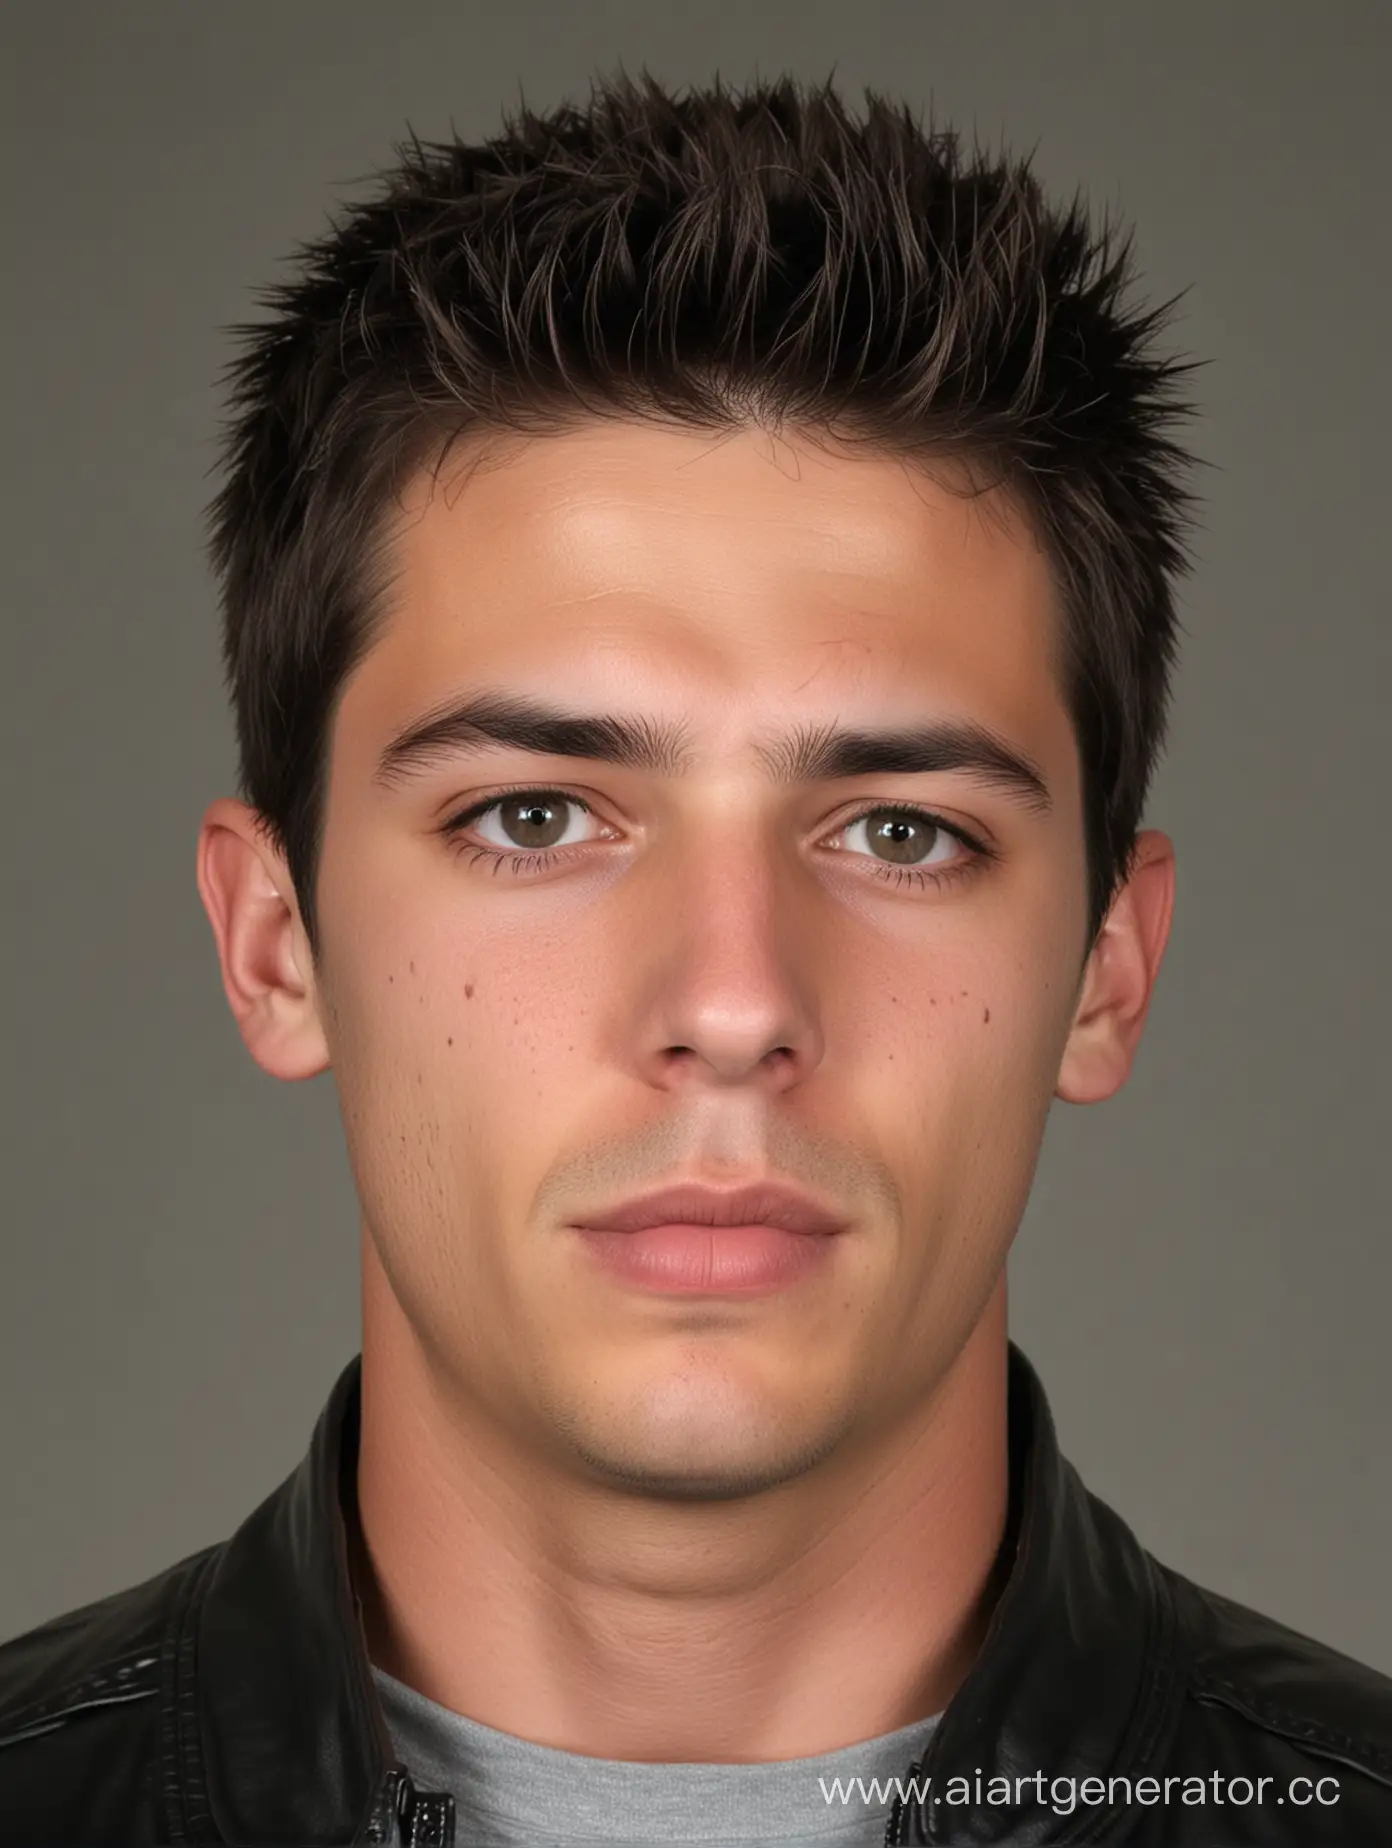 Generate a mugshot of a twenty-two-year-old American male. He has short hair. He is dressed in a black leather jacket. The expression on his face is neutral, with a hint of defiance in his eyes. The background of the mugshot is a standard gray backdrop commonly seen in police photographs. Ensure the lighting is even, highlighting his features distinctly.